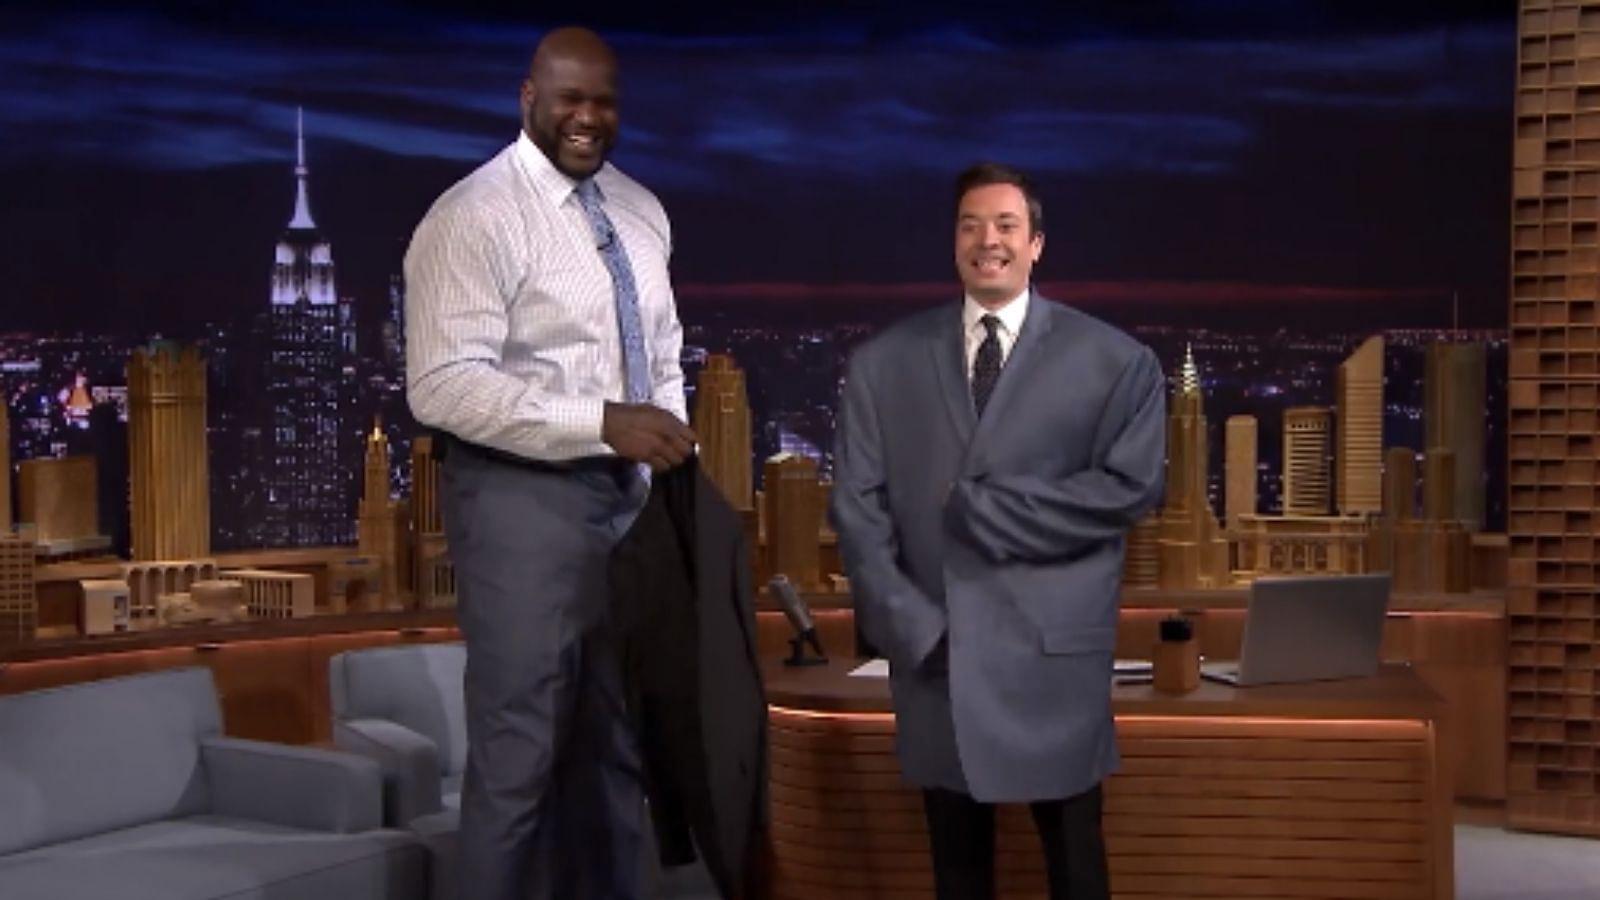 "A suit for Shaquille O'Neal is a gown for Jimmy Fallon": When the Tonight Show host exchanged clothes with the Diesel and got swallowed by them